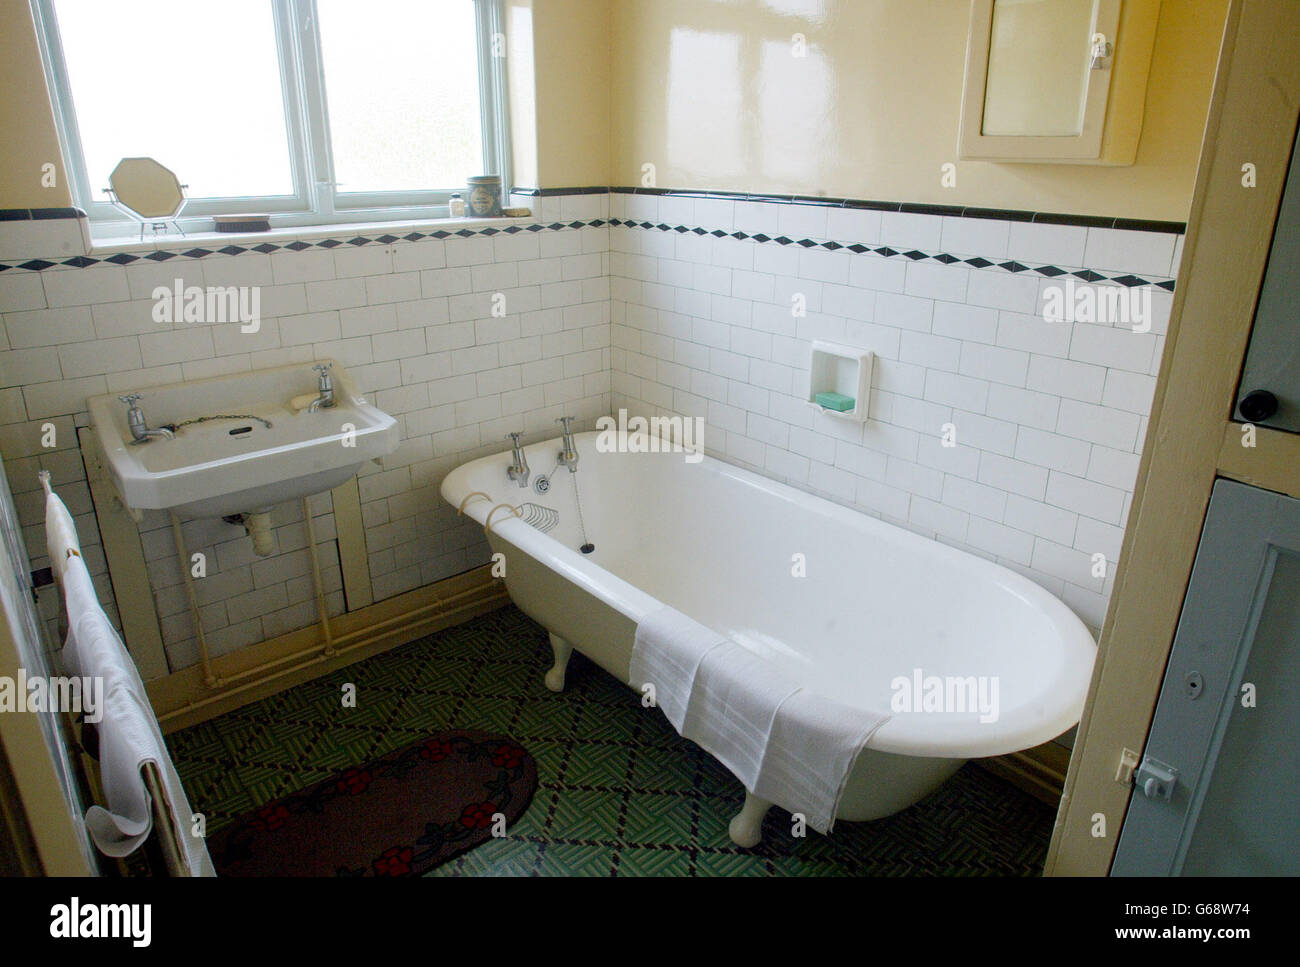 General view of the bathroom at 'Mendips', the childhood home of former Beatle, John Lennon in Liverpool. Stock Photo